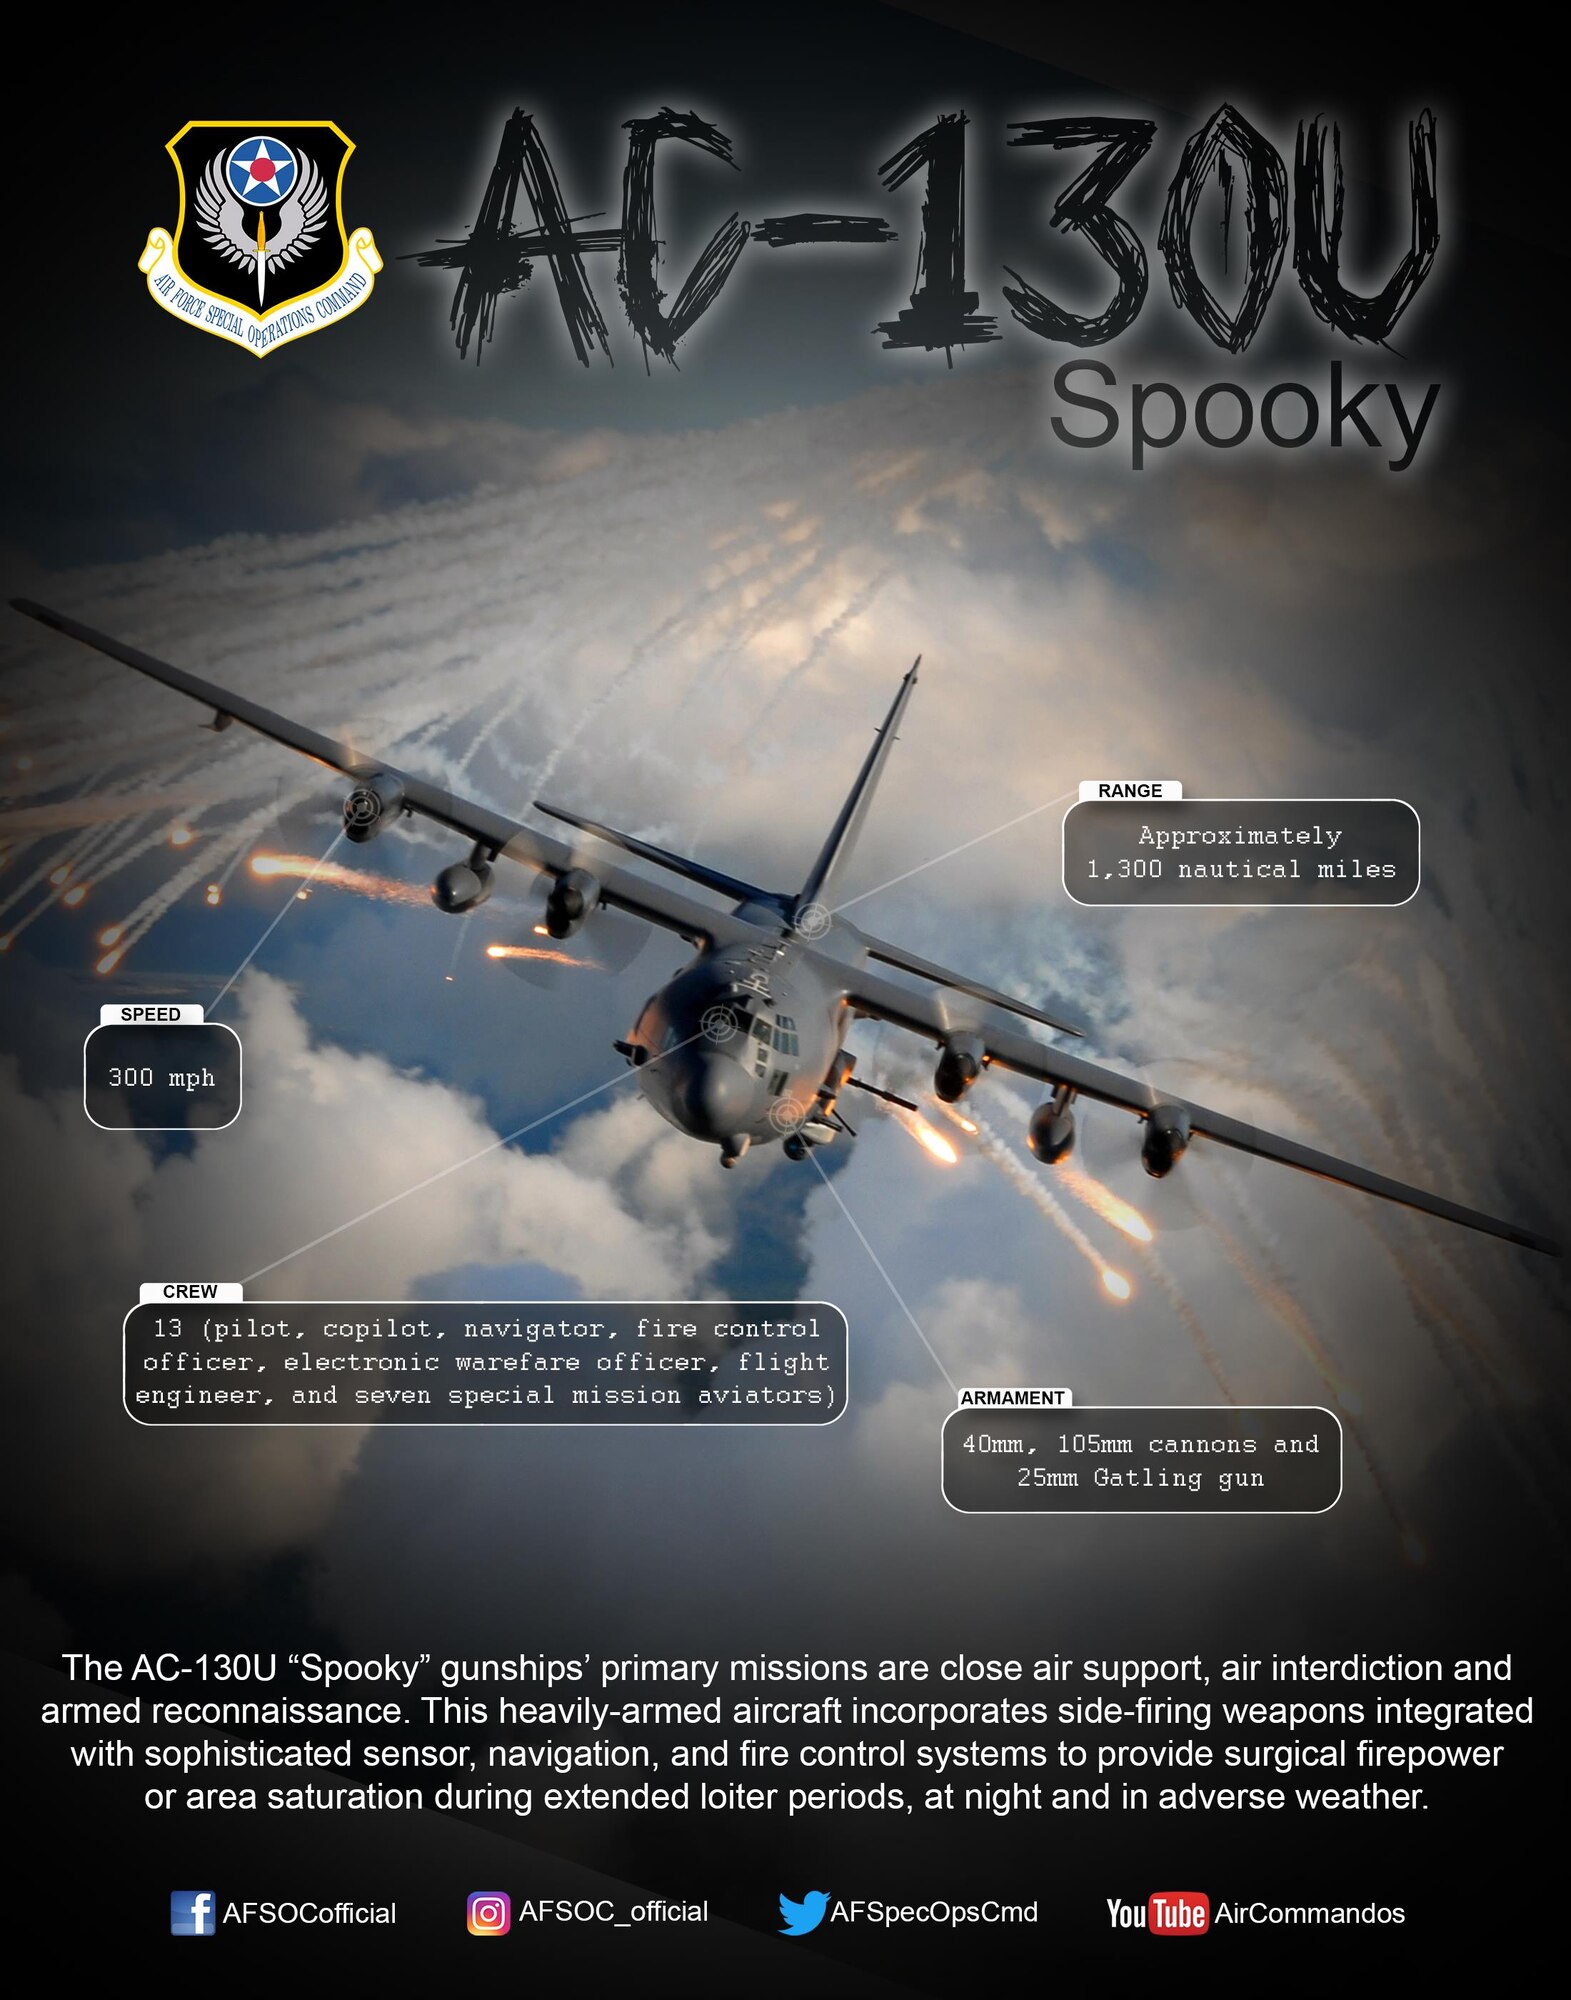 The AC-130U “Spooky” gunships’ primary missions are close air support, air interdiction and
armed reconnaissance. This heavily-armed aircraft incorporates side-firing weapons integrated
with sophisticated sensor, navigation, and fire control systems to provide surgical firepower
or area saturation during extended loiter periods, at night and in adverse weather.